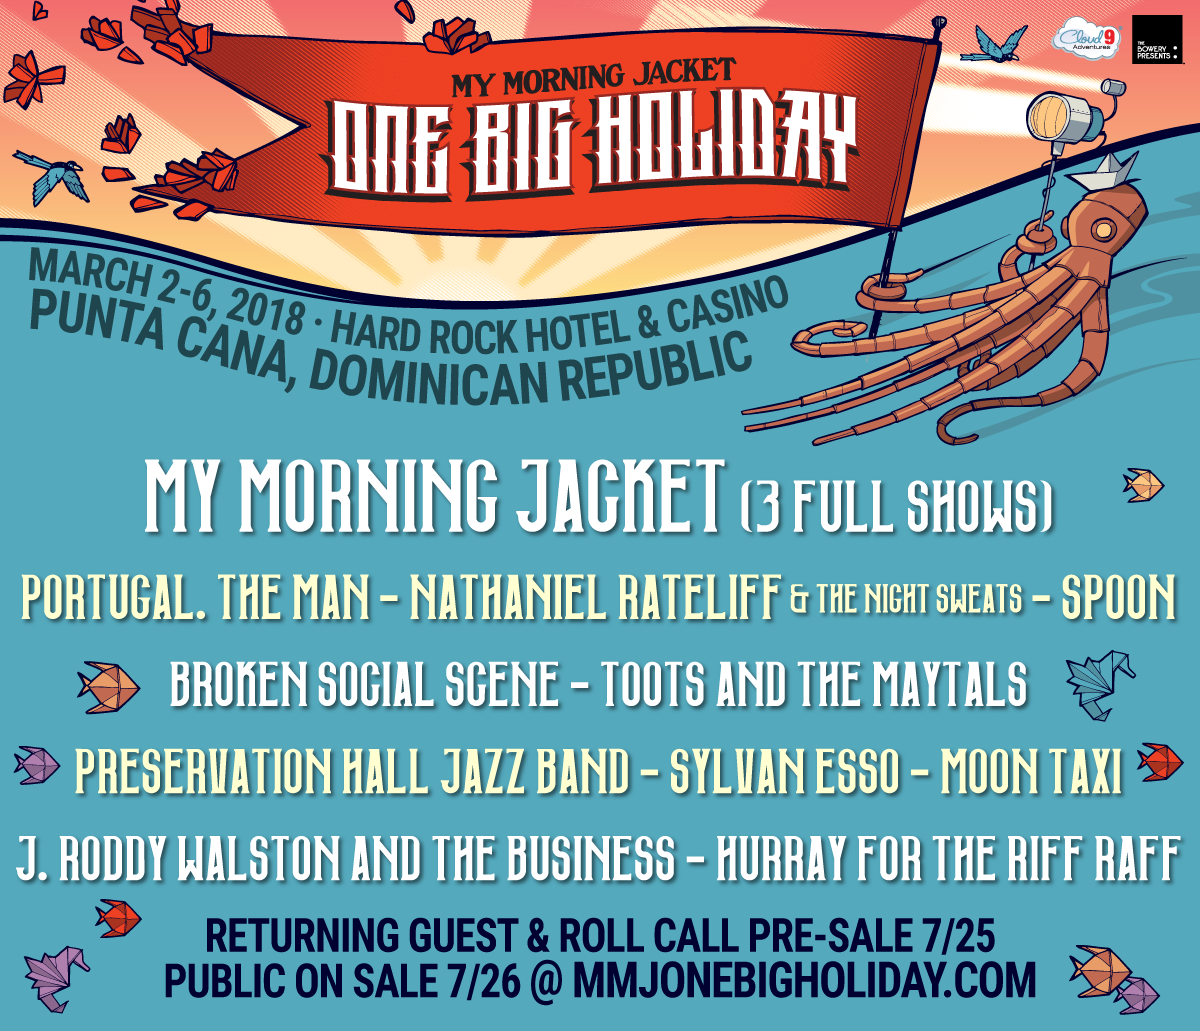 One Big Holiday featuring My Morning Jacket. Photo by: Cloud 9 Adventures